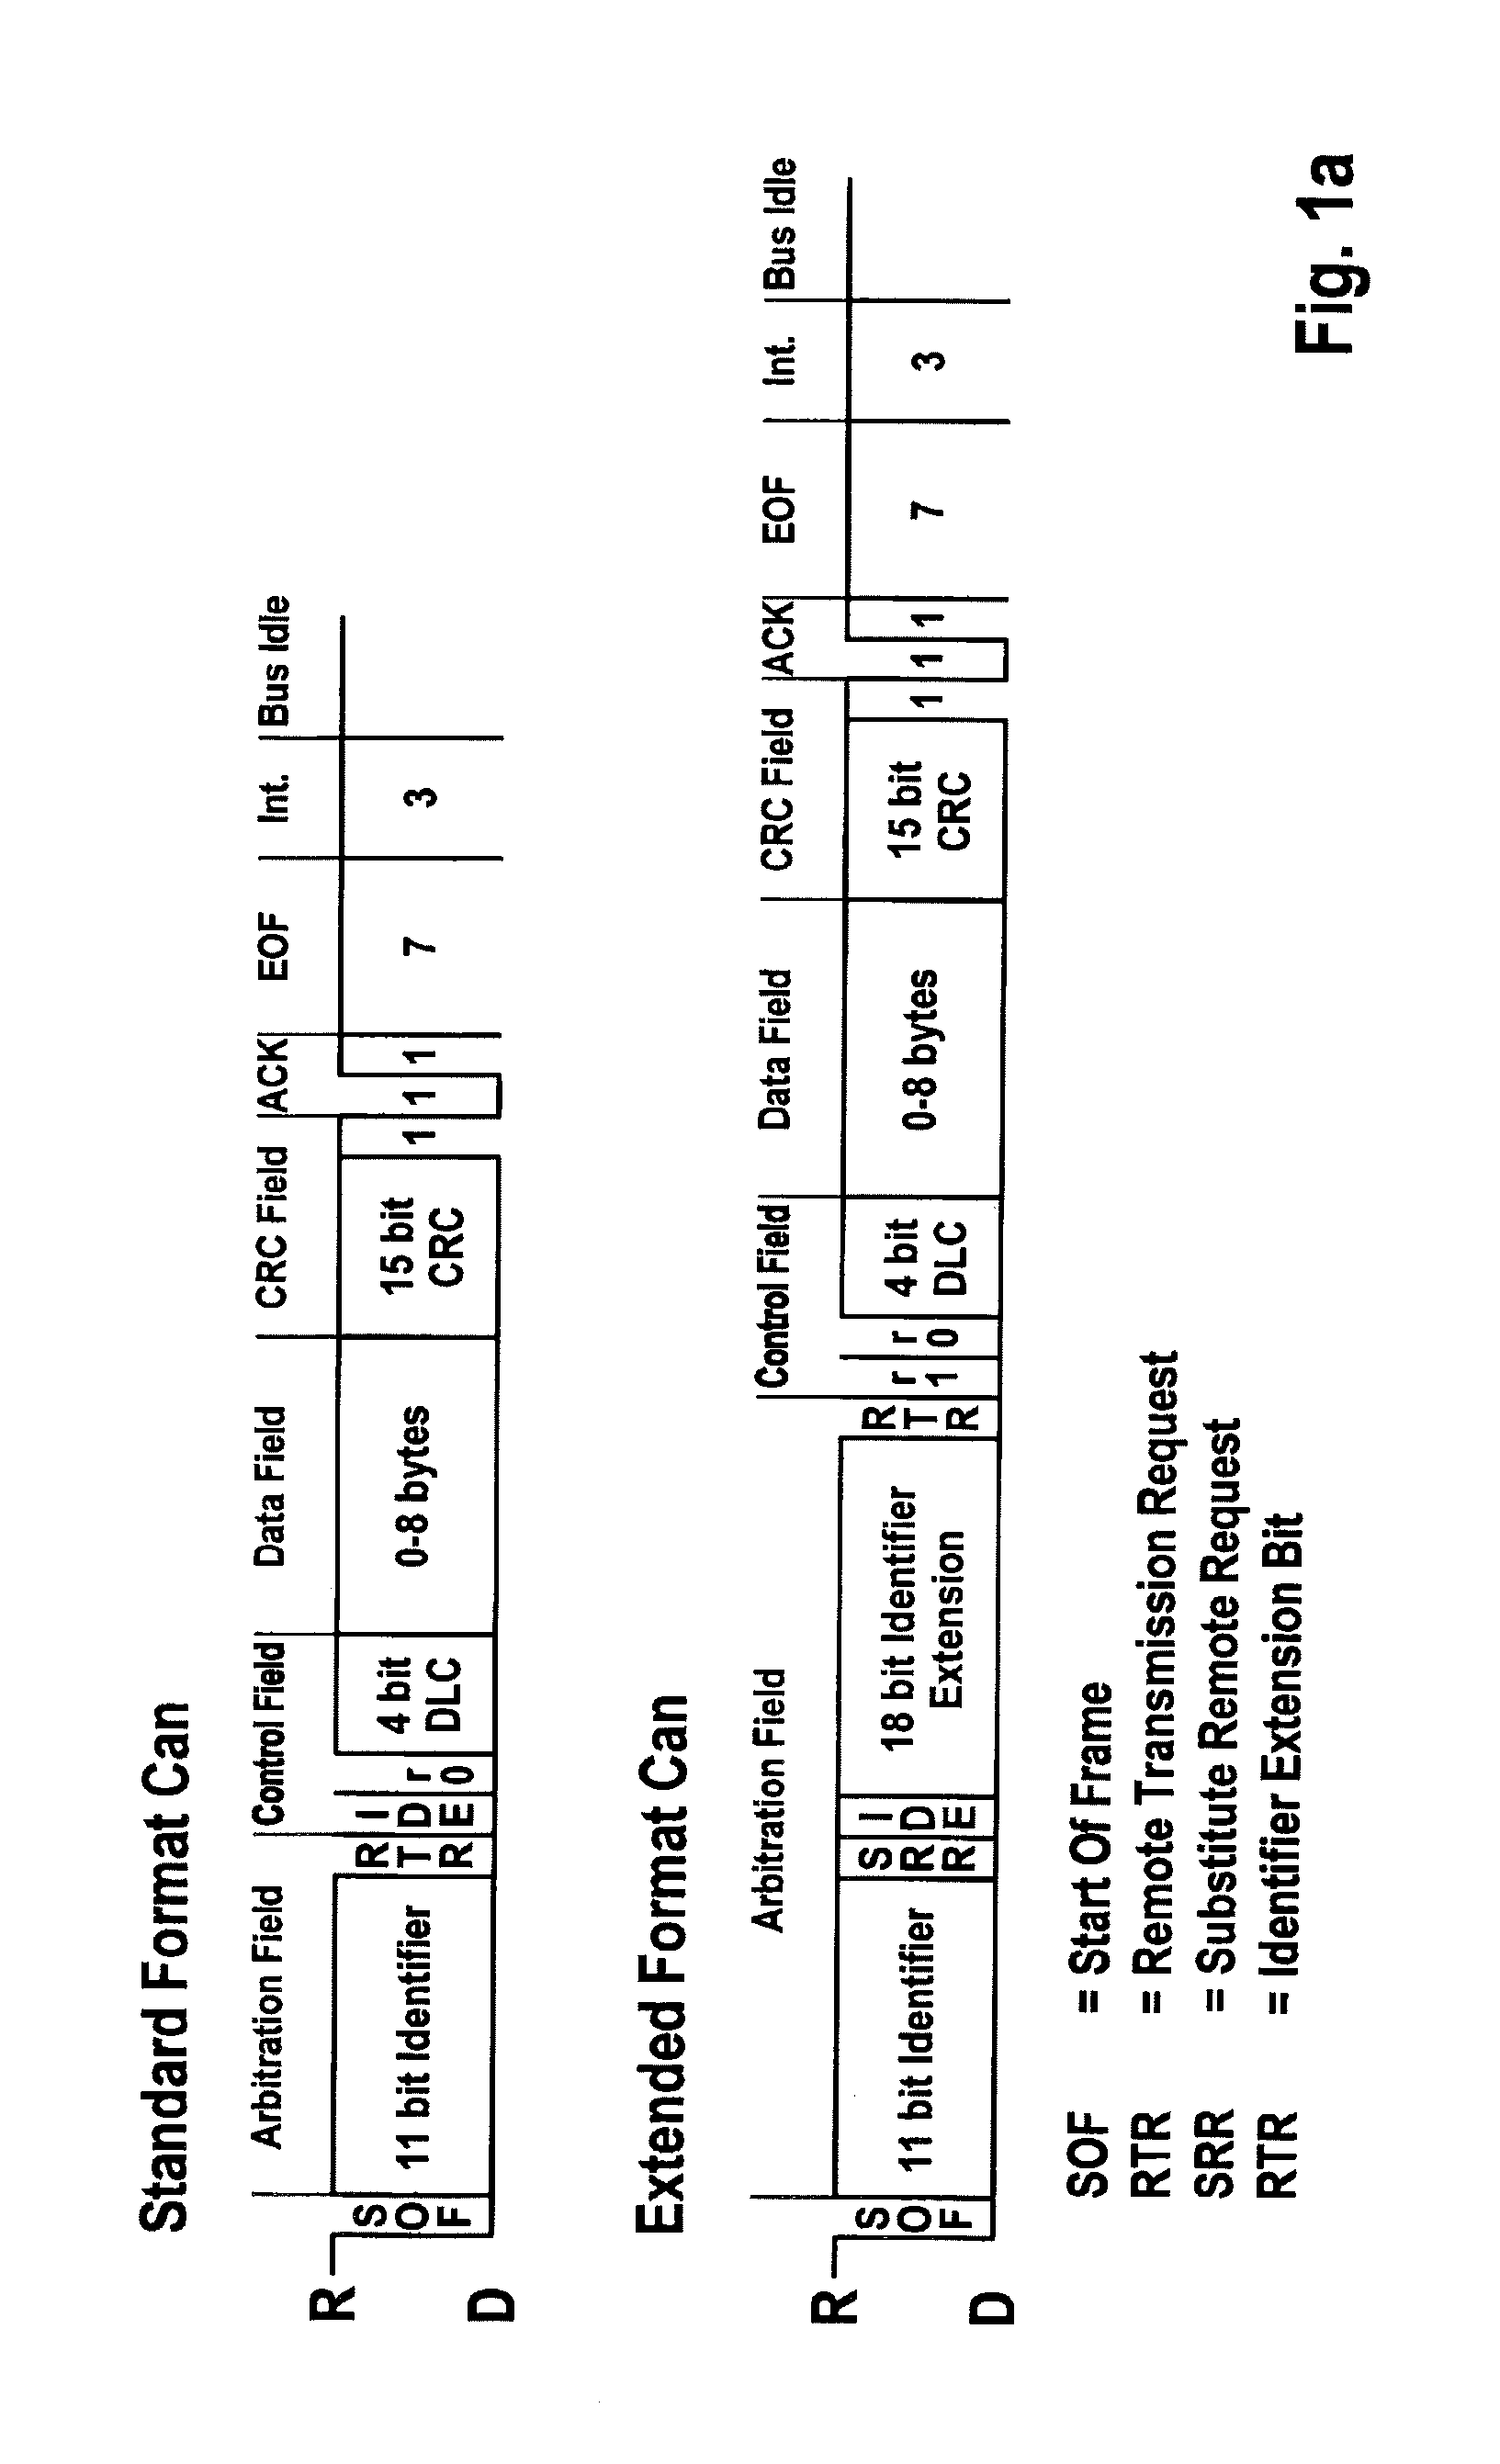 Method and device for checking the correct functioning of a serial data transmission